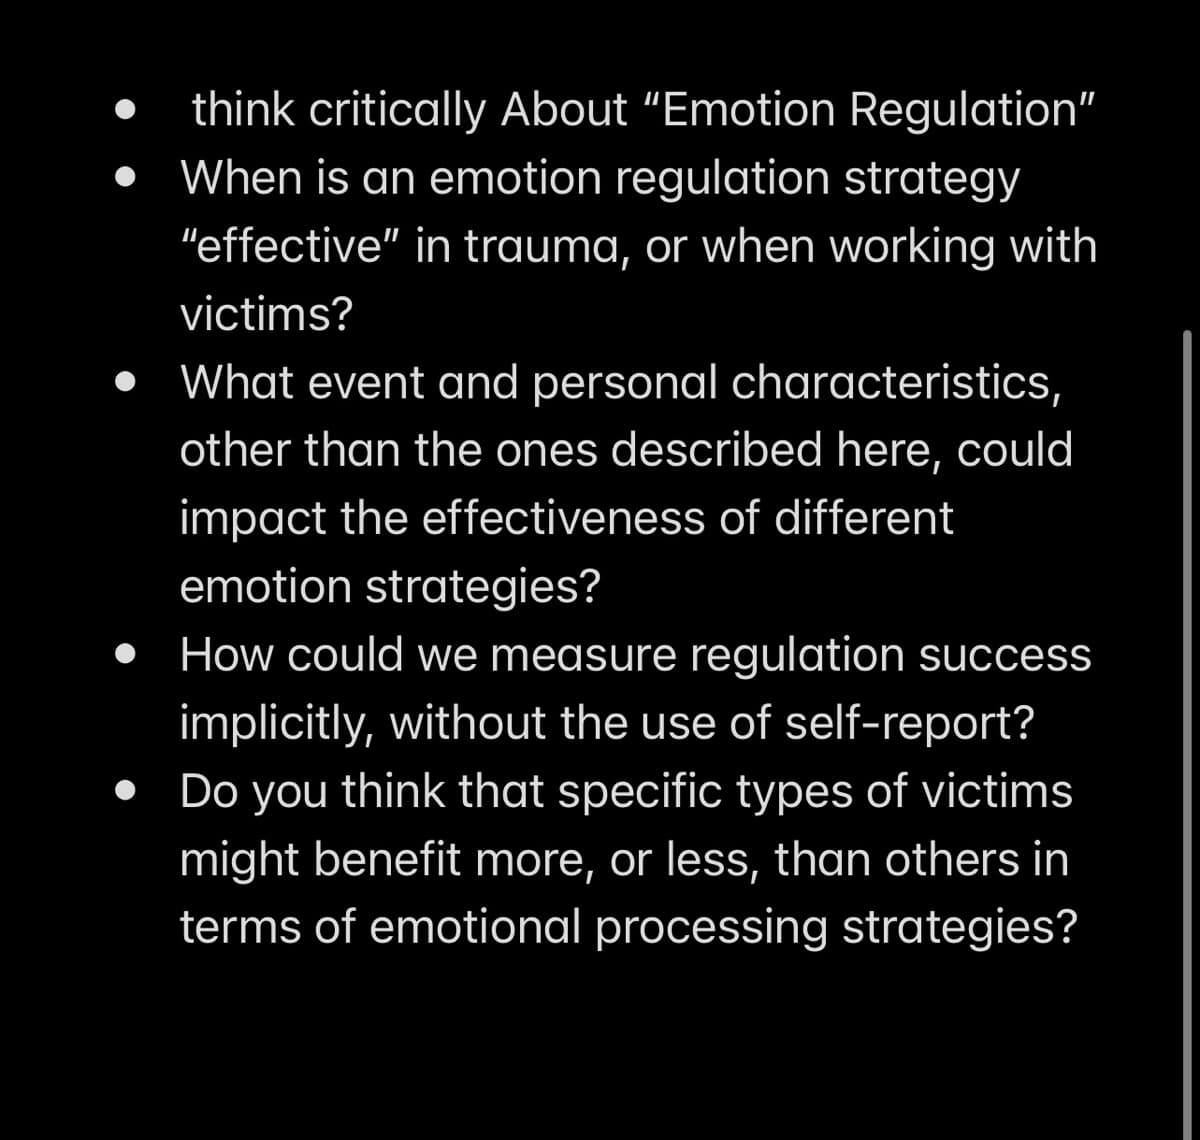 think critically About "Emotion Regulation"
When is an emotion regulation strategy
"effective" in trauma, or when working with
victims?
• What event and personal characteristics,
other than the ones described here, could
impact the effectiveness of different
emotion strategies?
How could we measure regulation success
implicitly, without the use of self-report?
• Do you think that specific types of victims
might benefit more, or less, than others in
terms of emotional processing strategies?